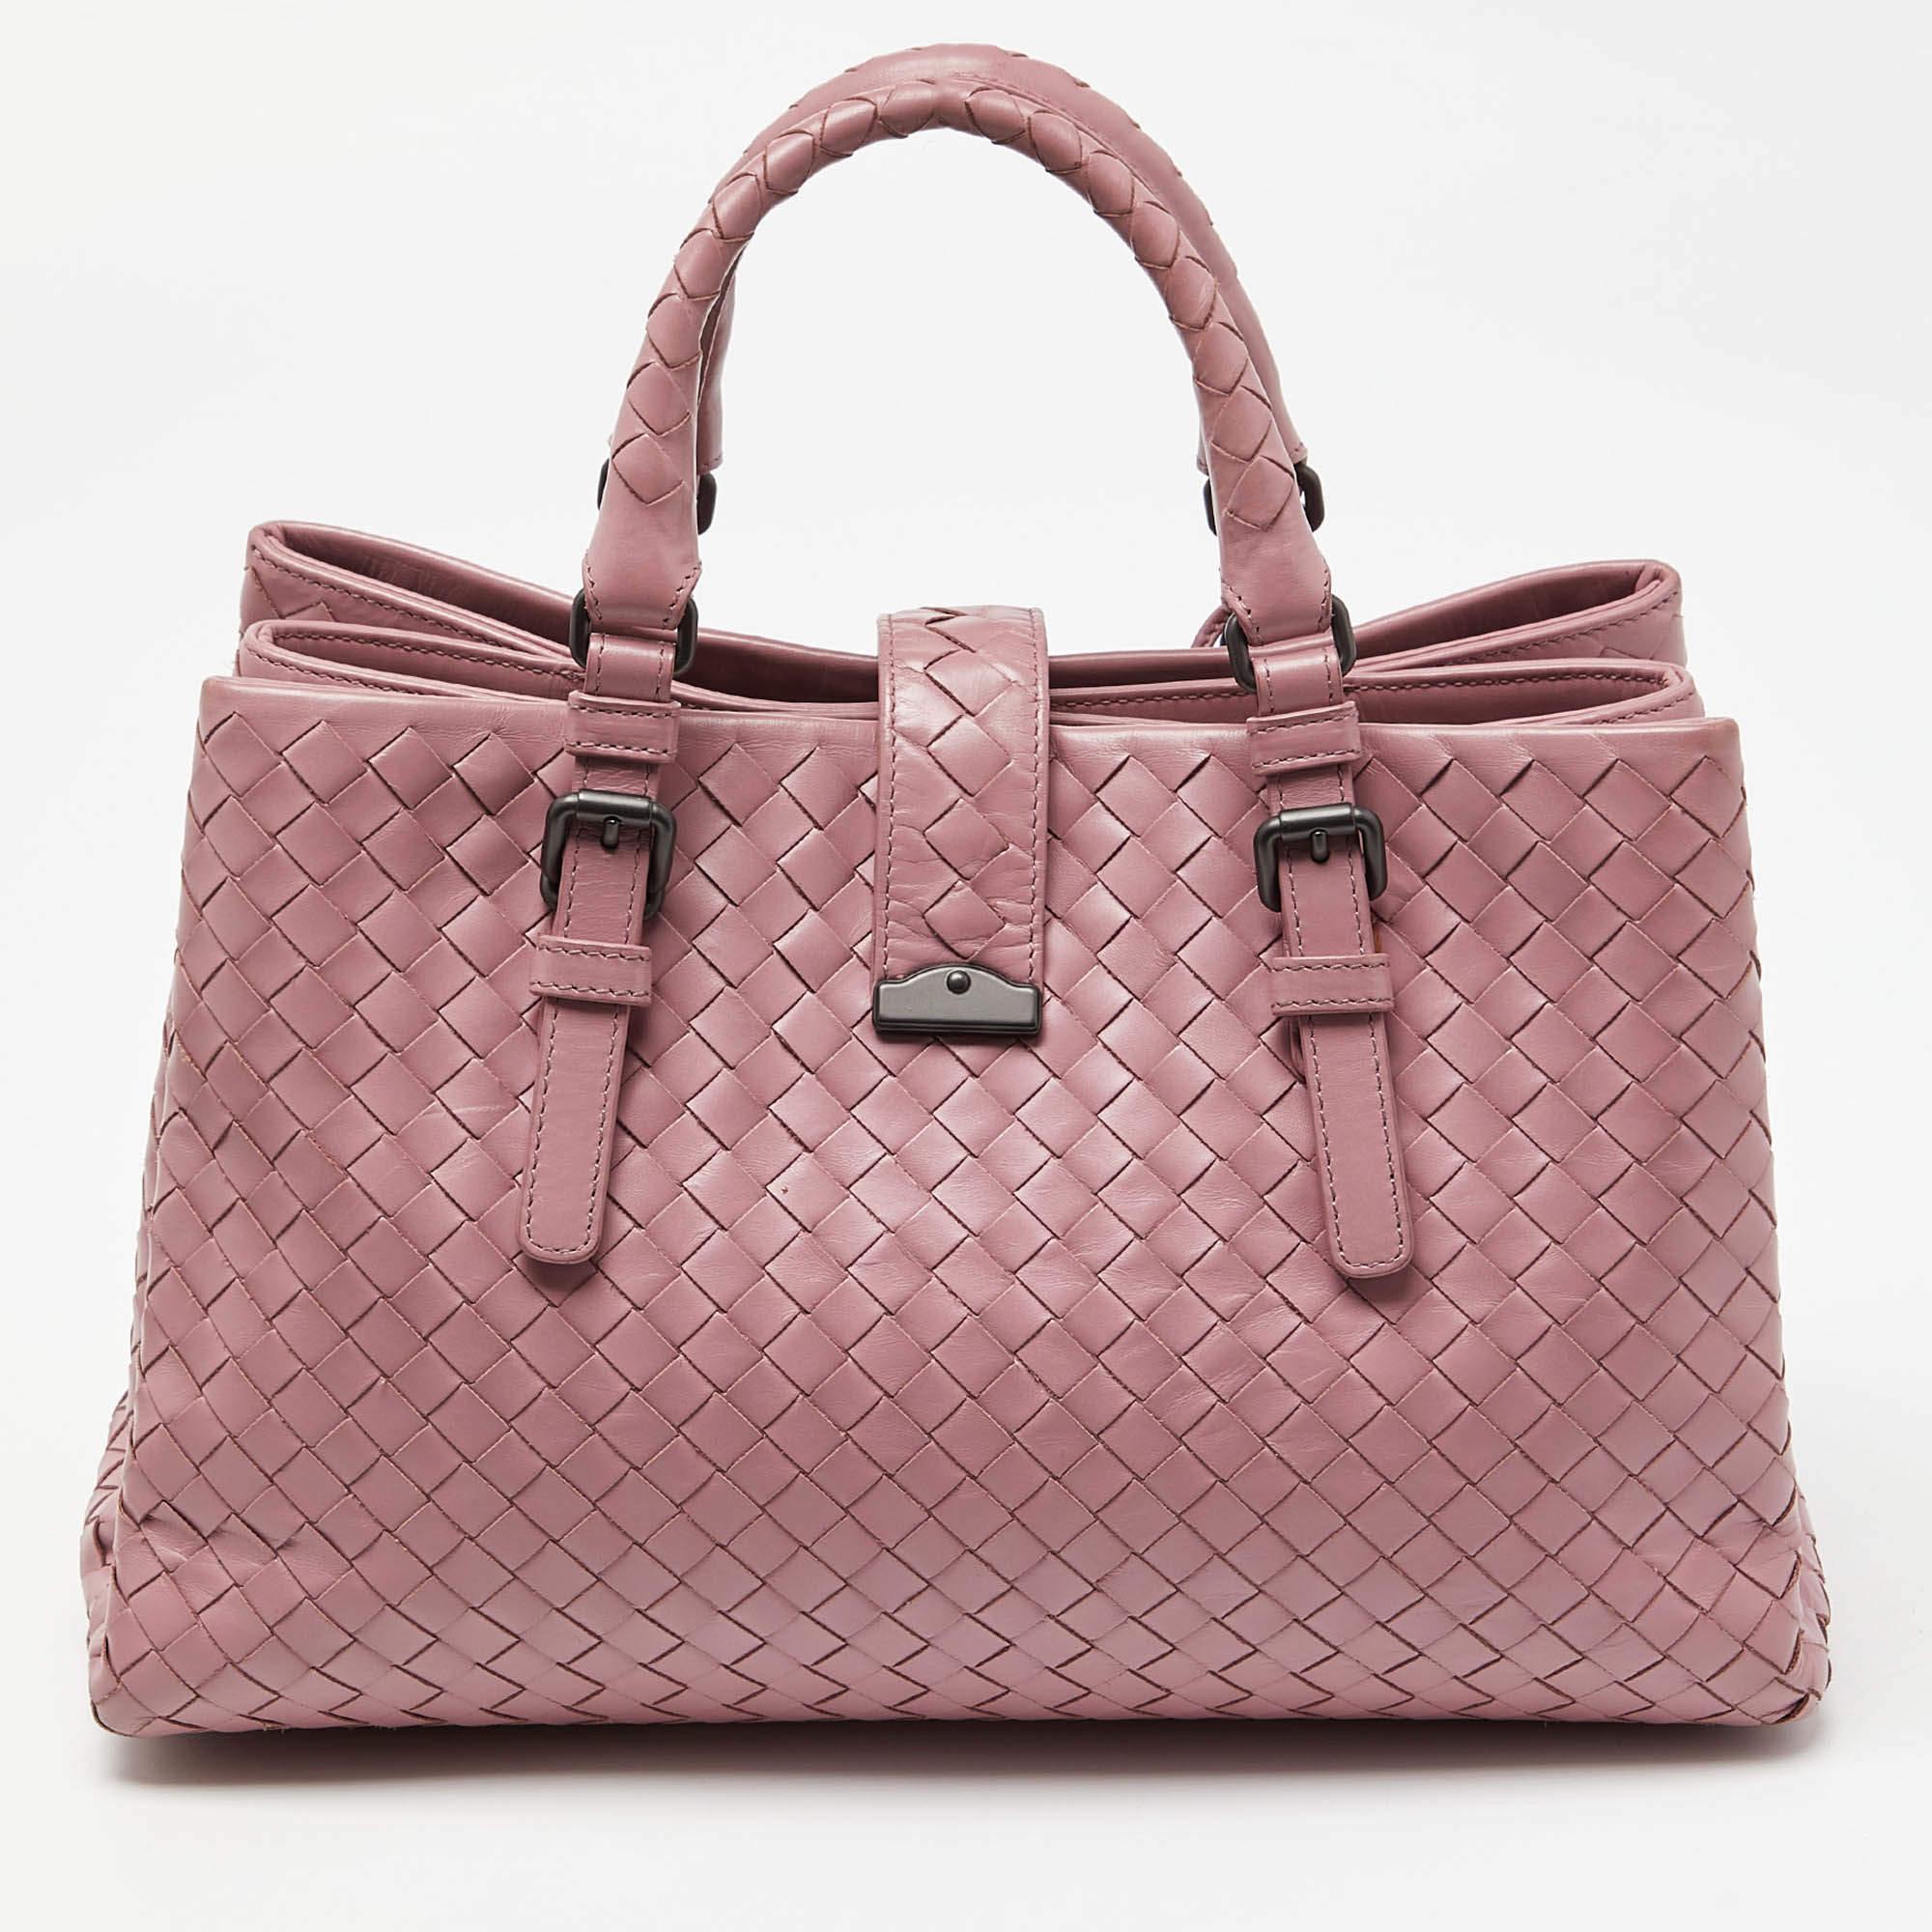 Bottega Veneta's Roma tote is a timeless addition to your accessory edit. The bag is beautifully woven using the Intrecciato technique that strengthens the leather. This pink-hued creation opens to roomy suede compartments. The creation is finished